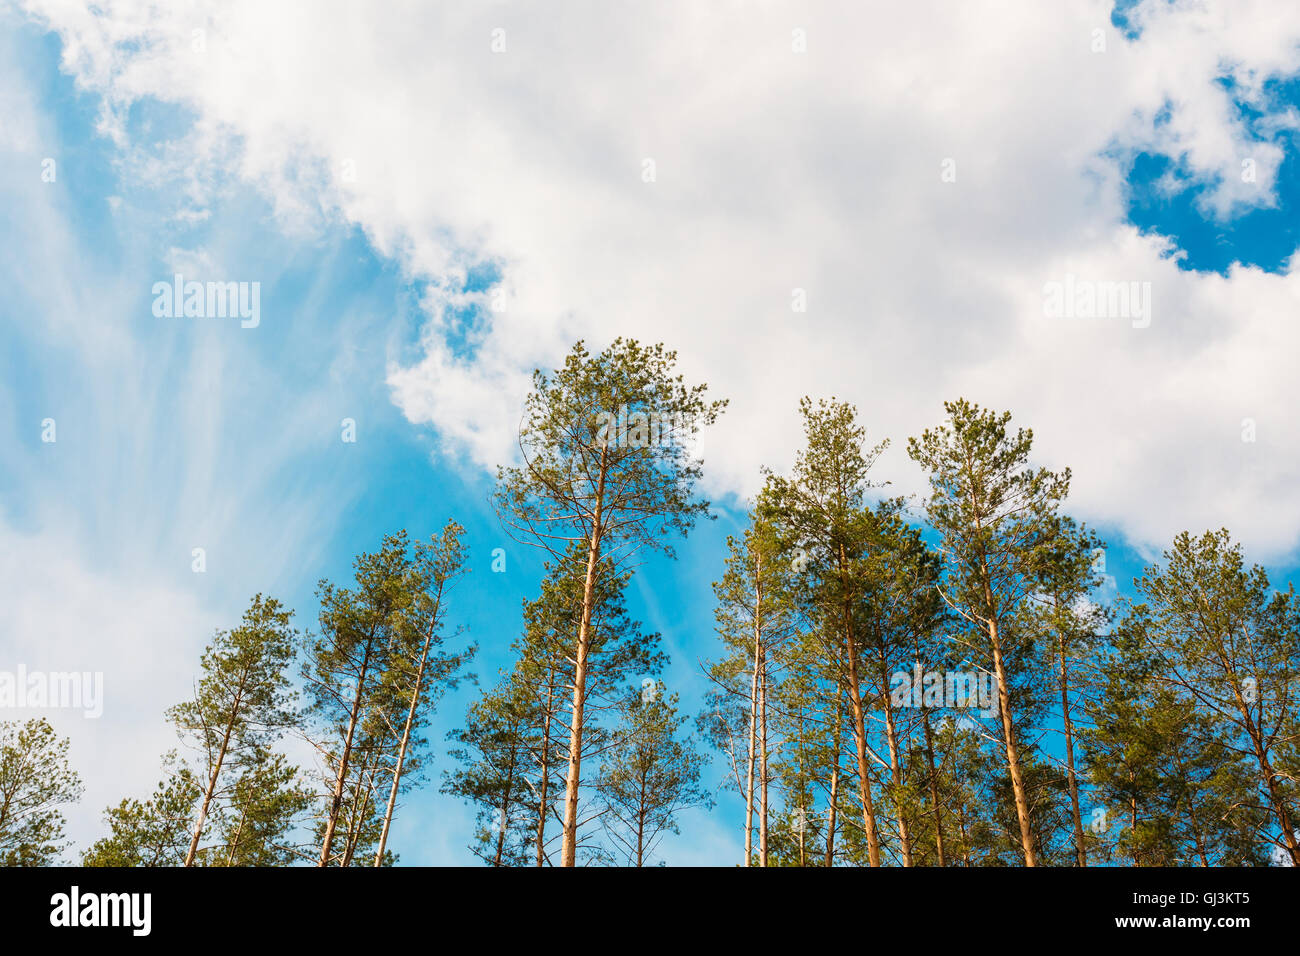 Crowns Treetops Of Tall Thin Slender Evergreen Pines Under Cloudy Spring Summer Blue Sky Welkin Background. Stock Photo